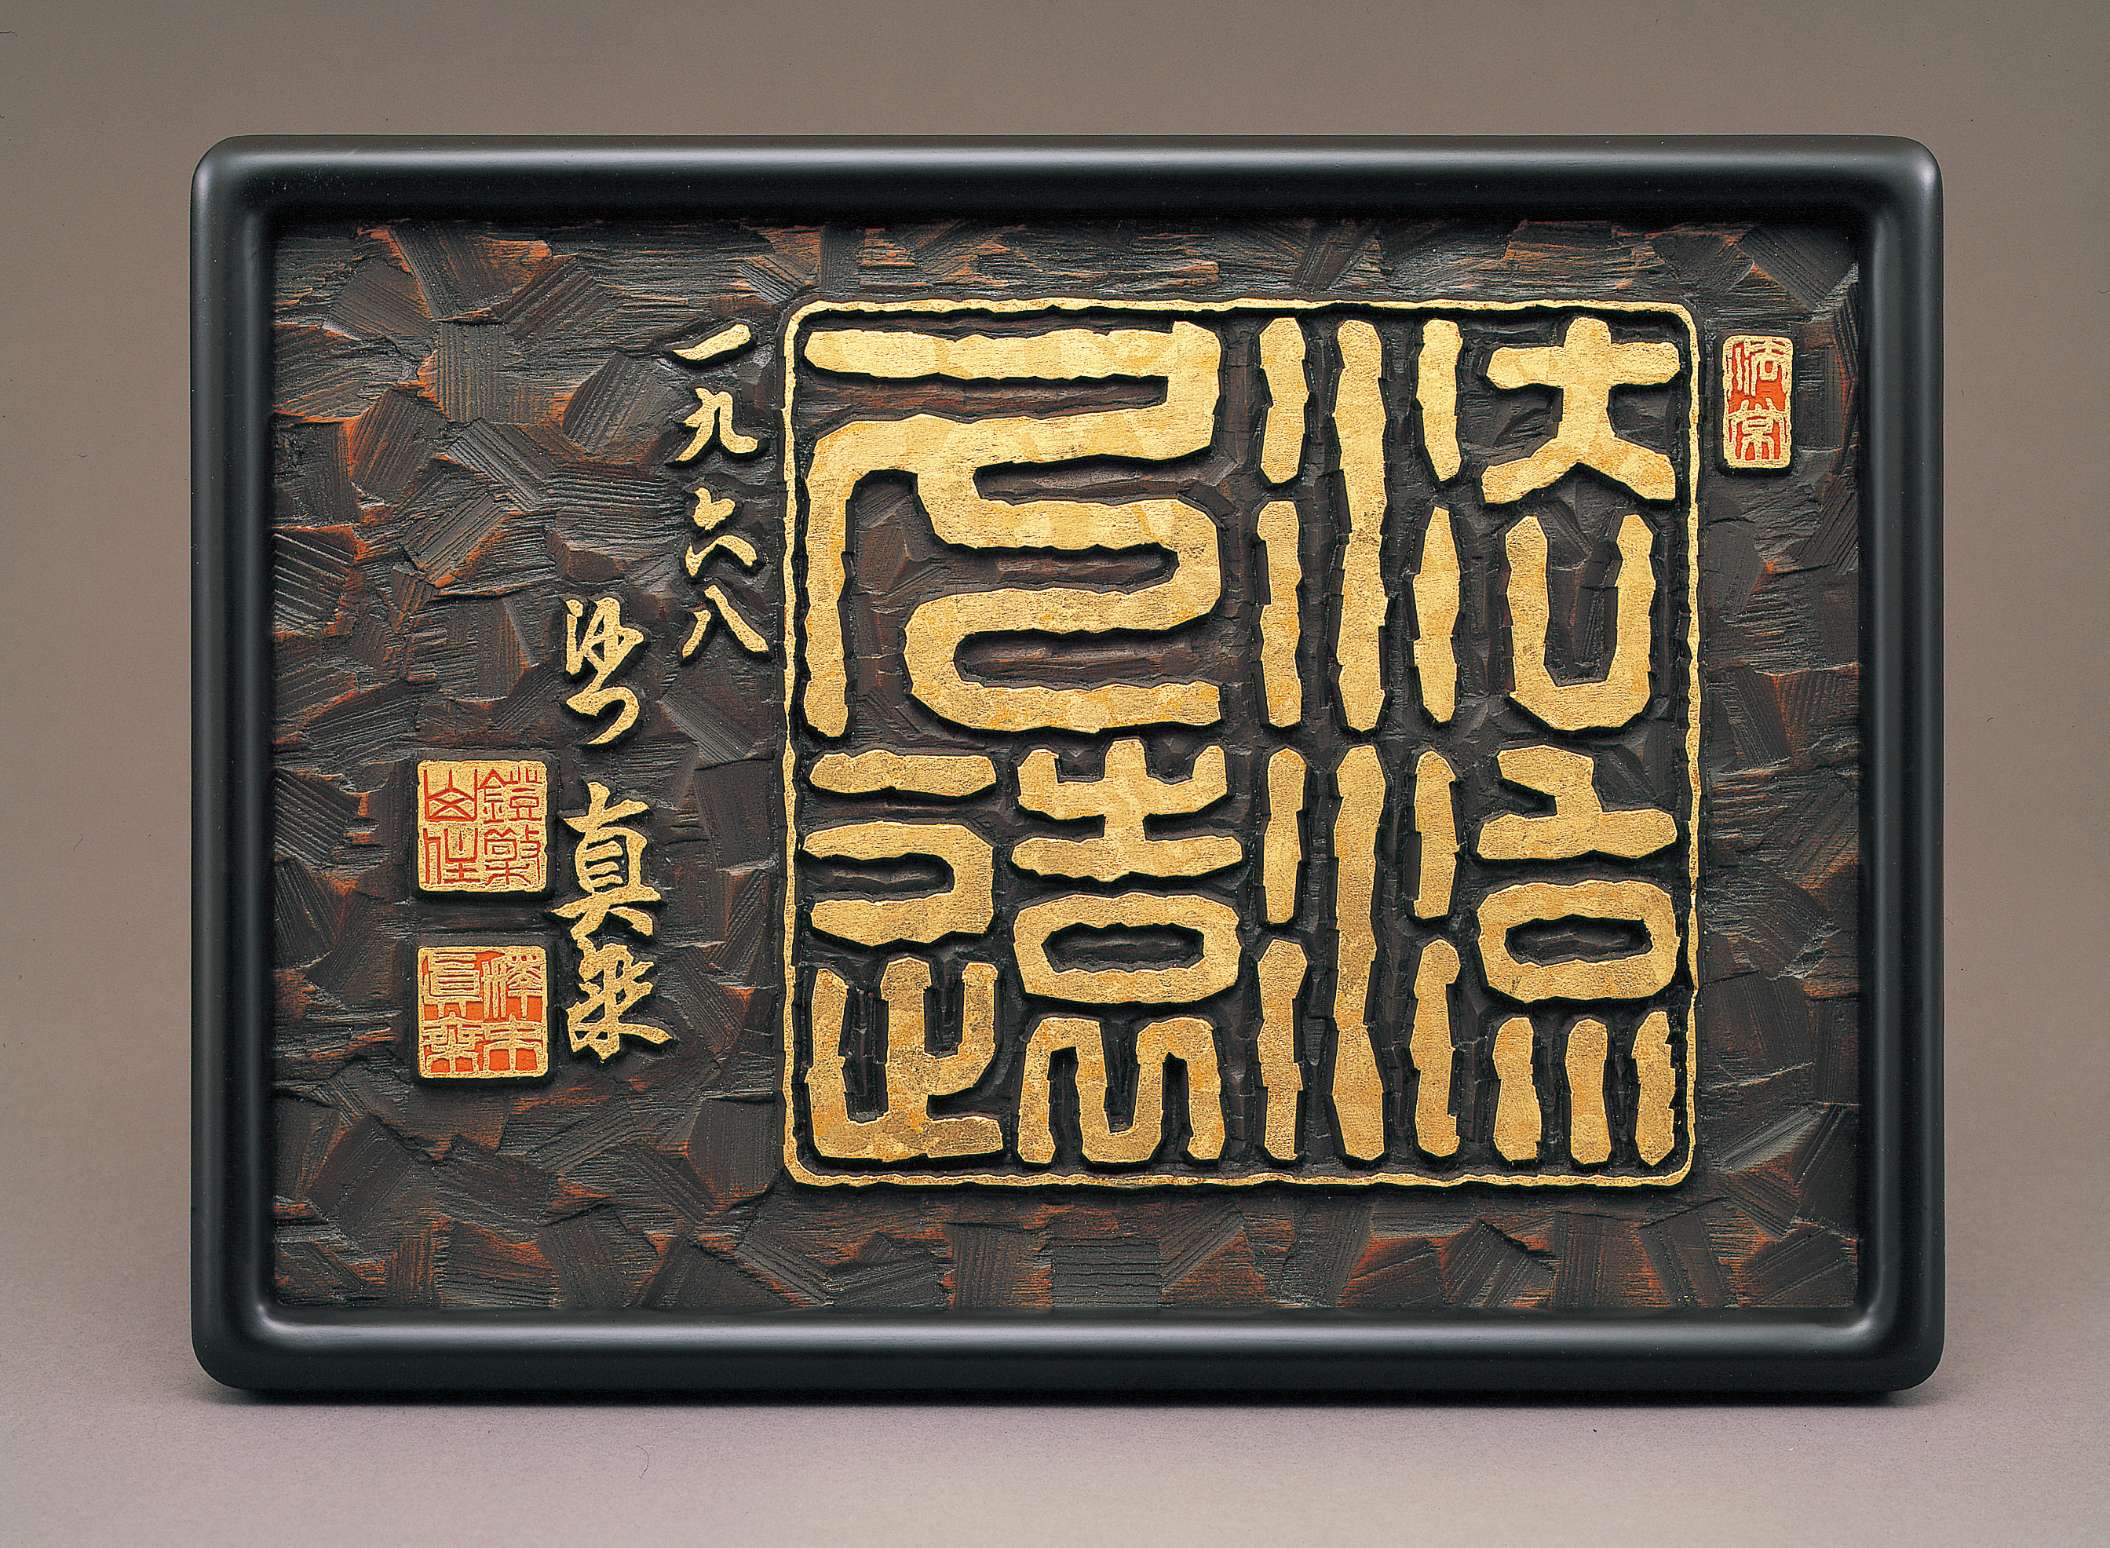 Stylized, thick-lined Japanese characters in gold are carved into a slab of dark brown wood, framed by a thin golden border, embellished by adjacent golden calligraphy and red and gold seals.